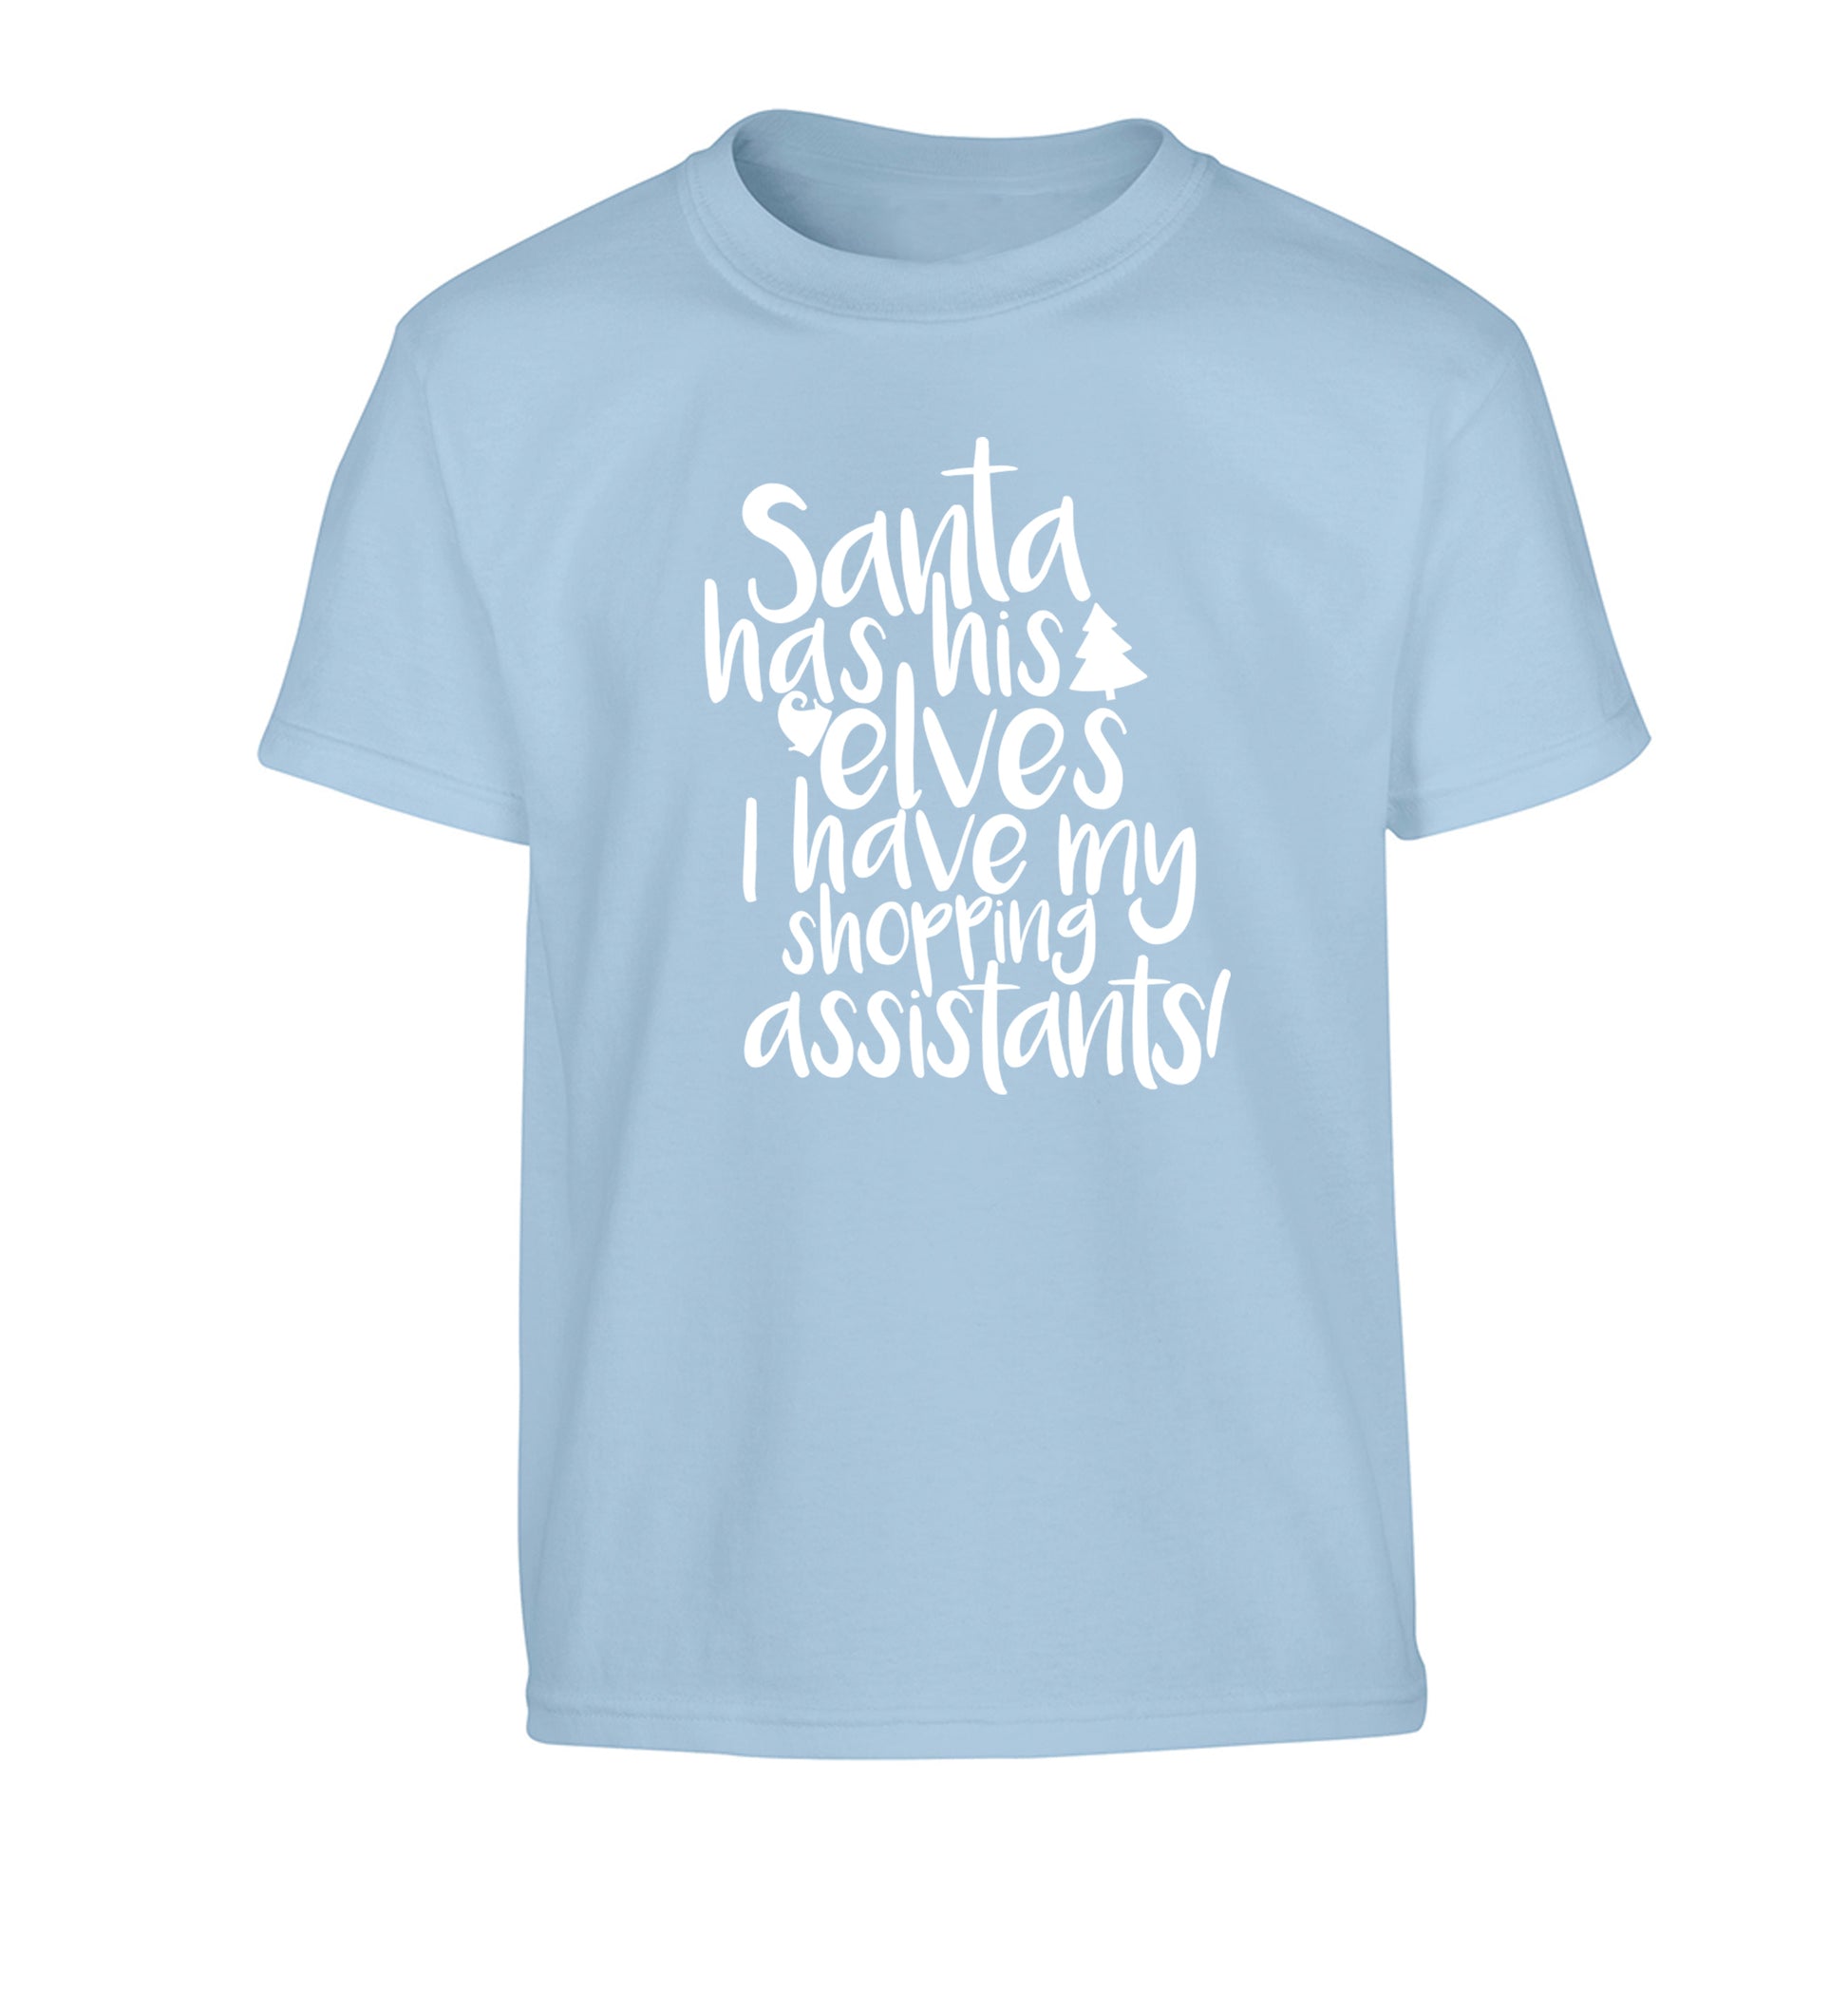 Santa has his elves I have my shopping assistant Children's light blue Tshirt 12-14 Years